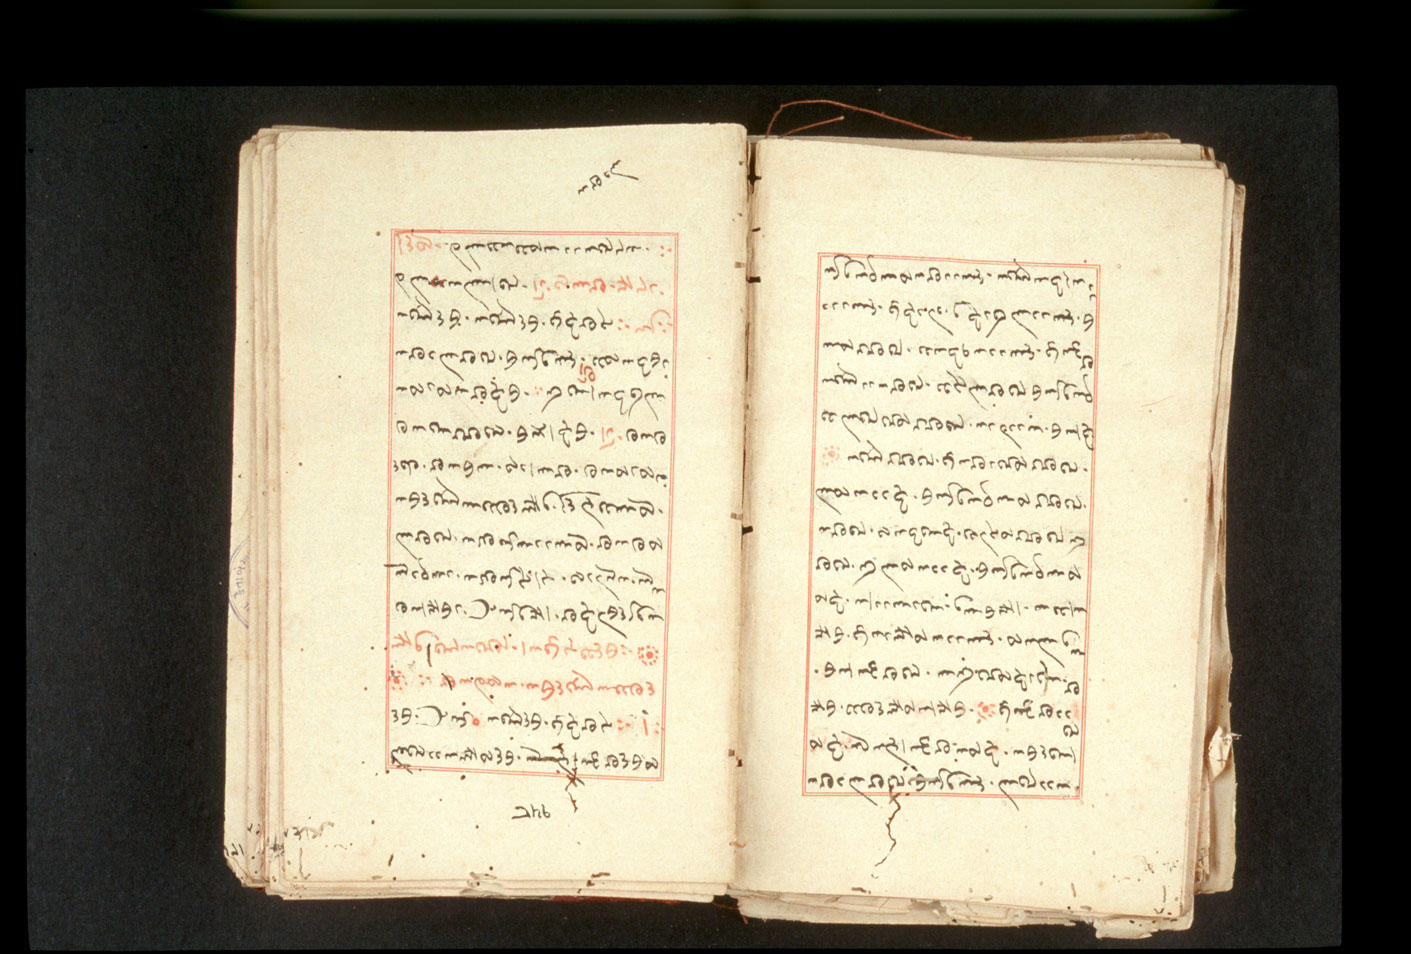 Folios 158v (right) and 159r (left)